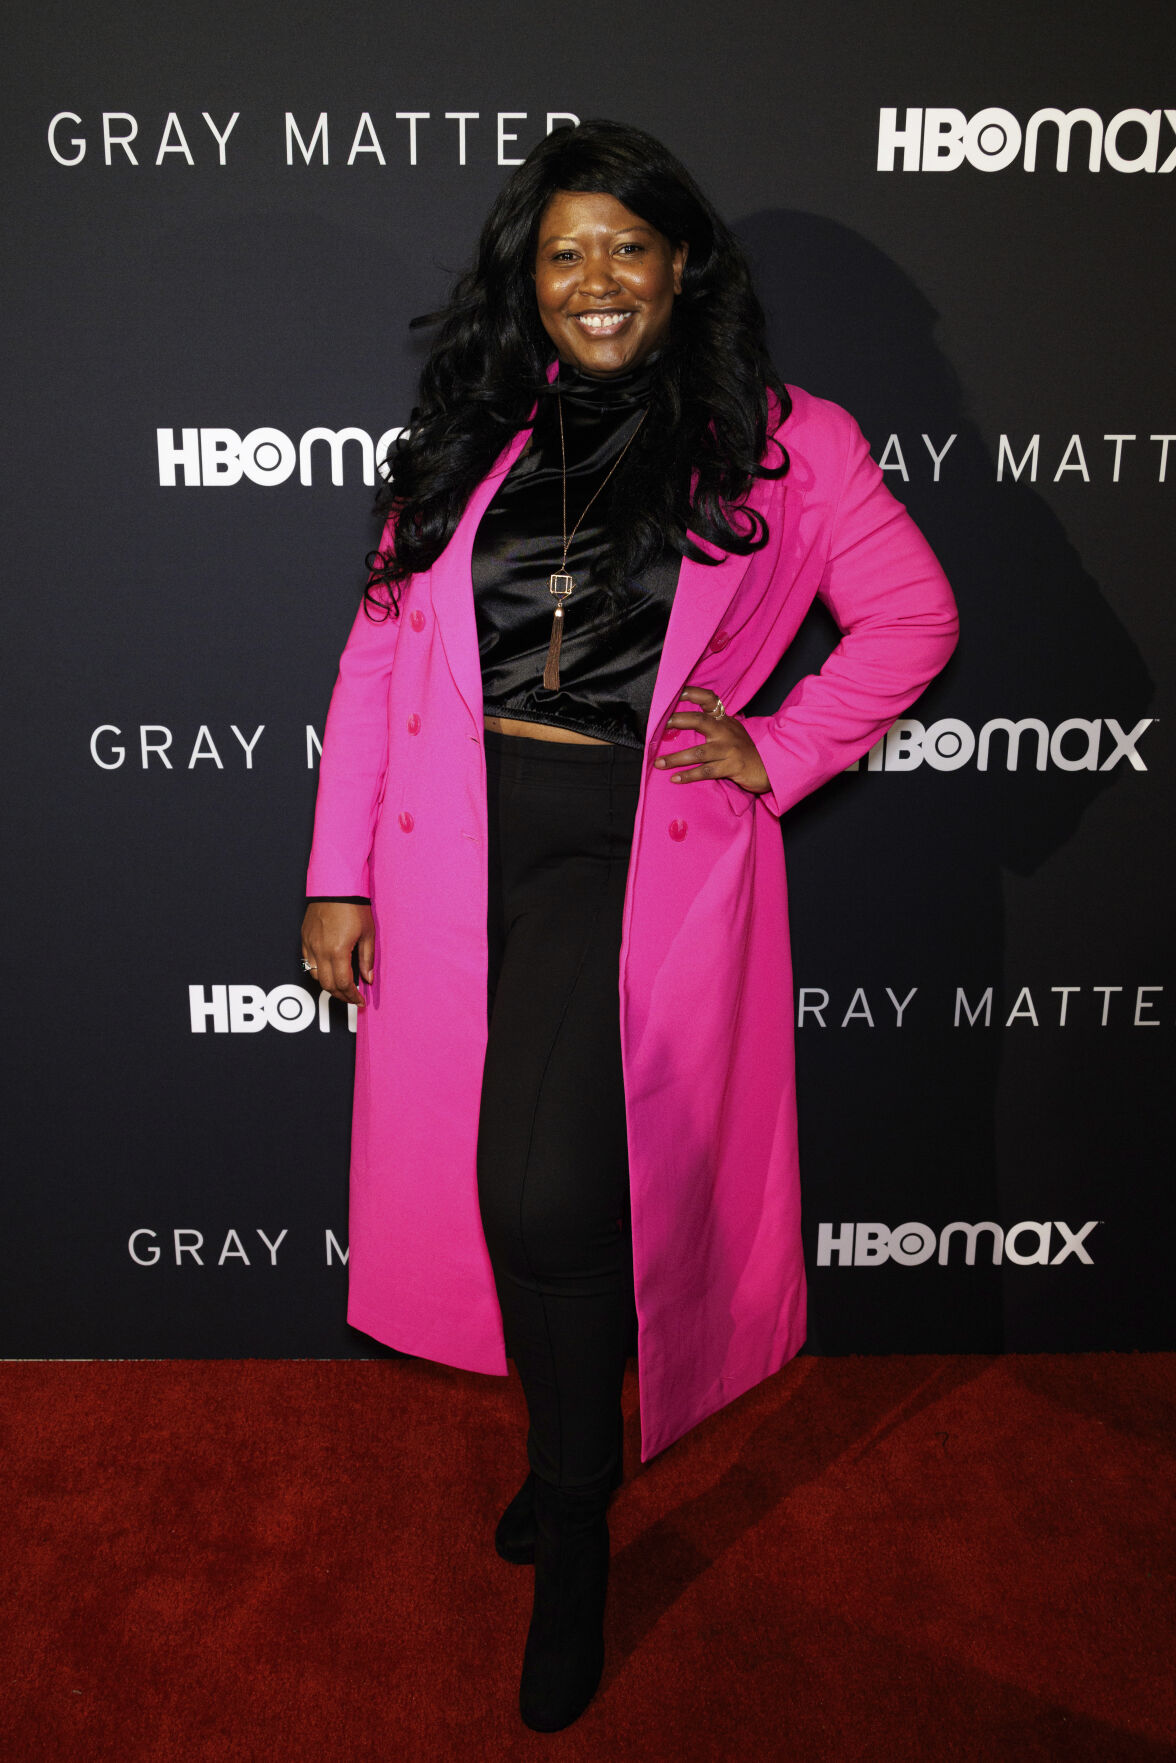 Nichole Roberts at a special screening of "Gray Matter," part of the series "Project Greenlight," on Tuesday, Feb. 28, 2023, at The Fairmont Miramar in Santa Monica, Calif.